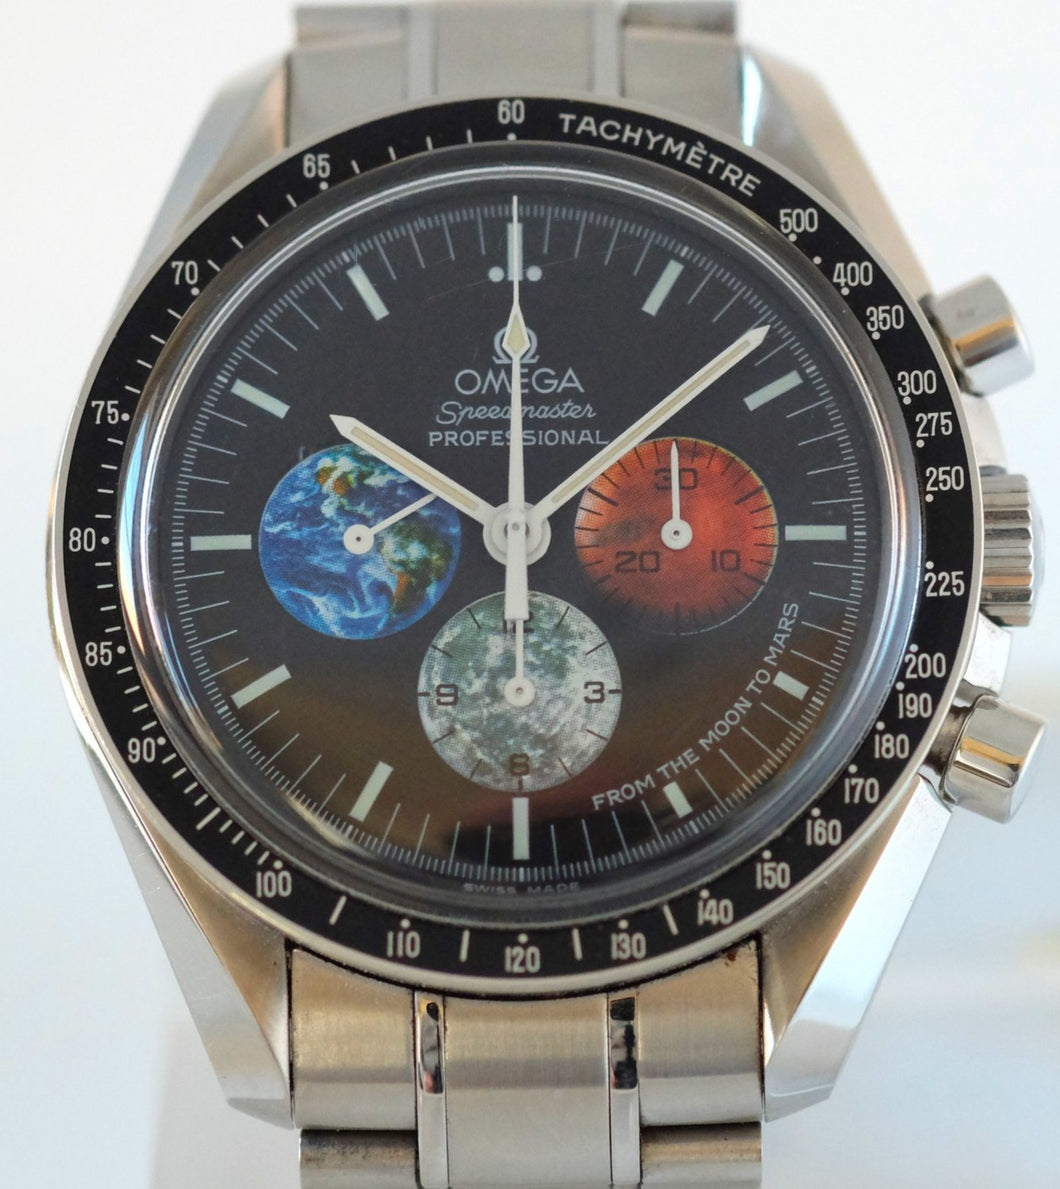 Omega Speedmaster Professional from Moon to Mars